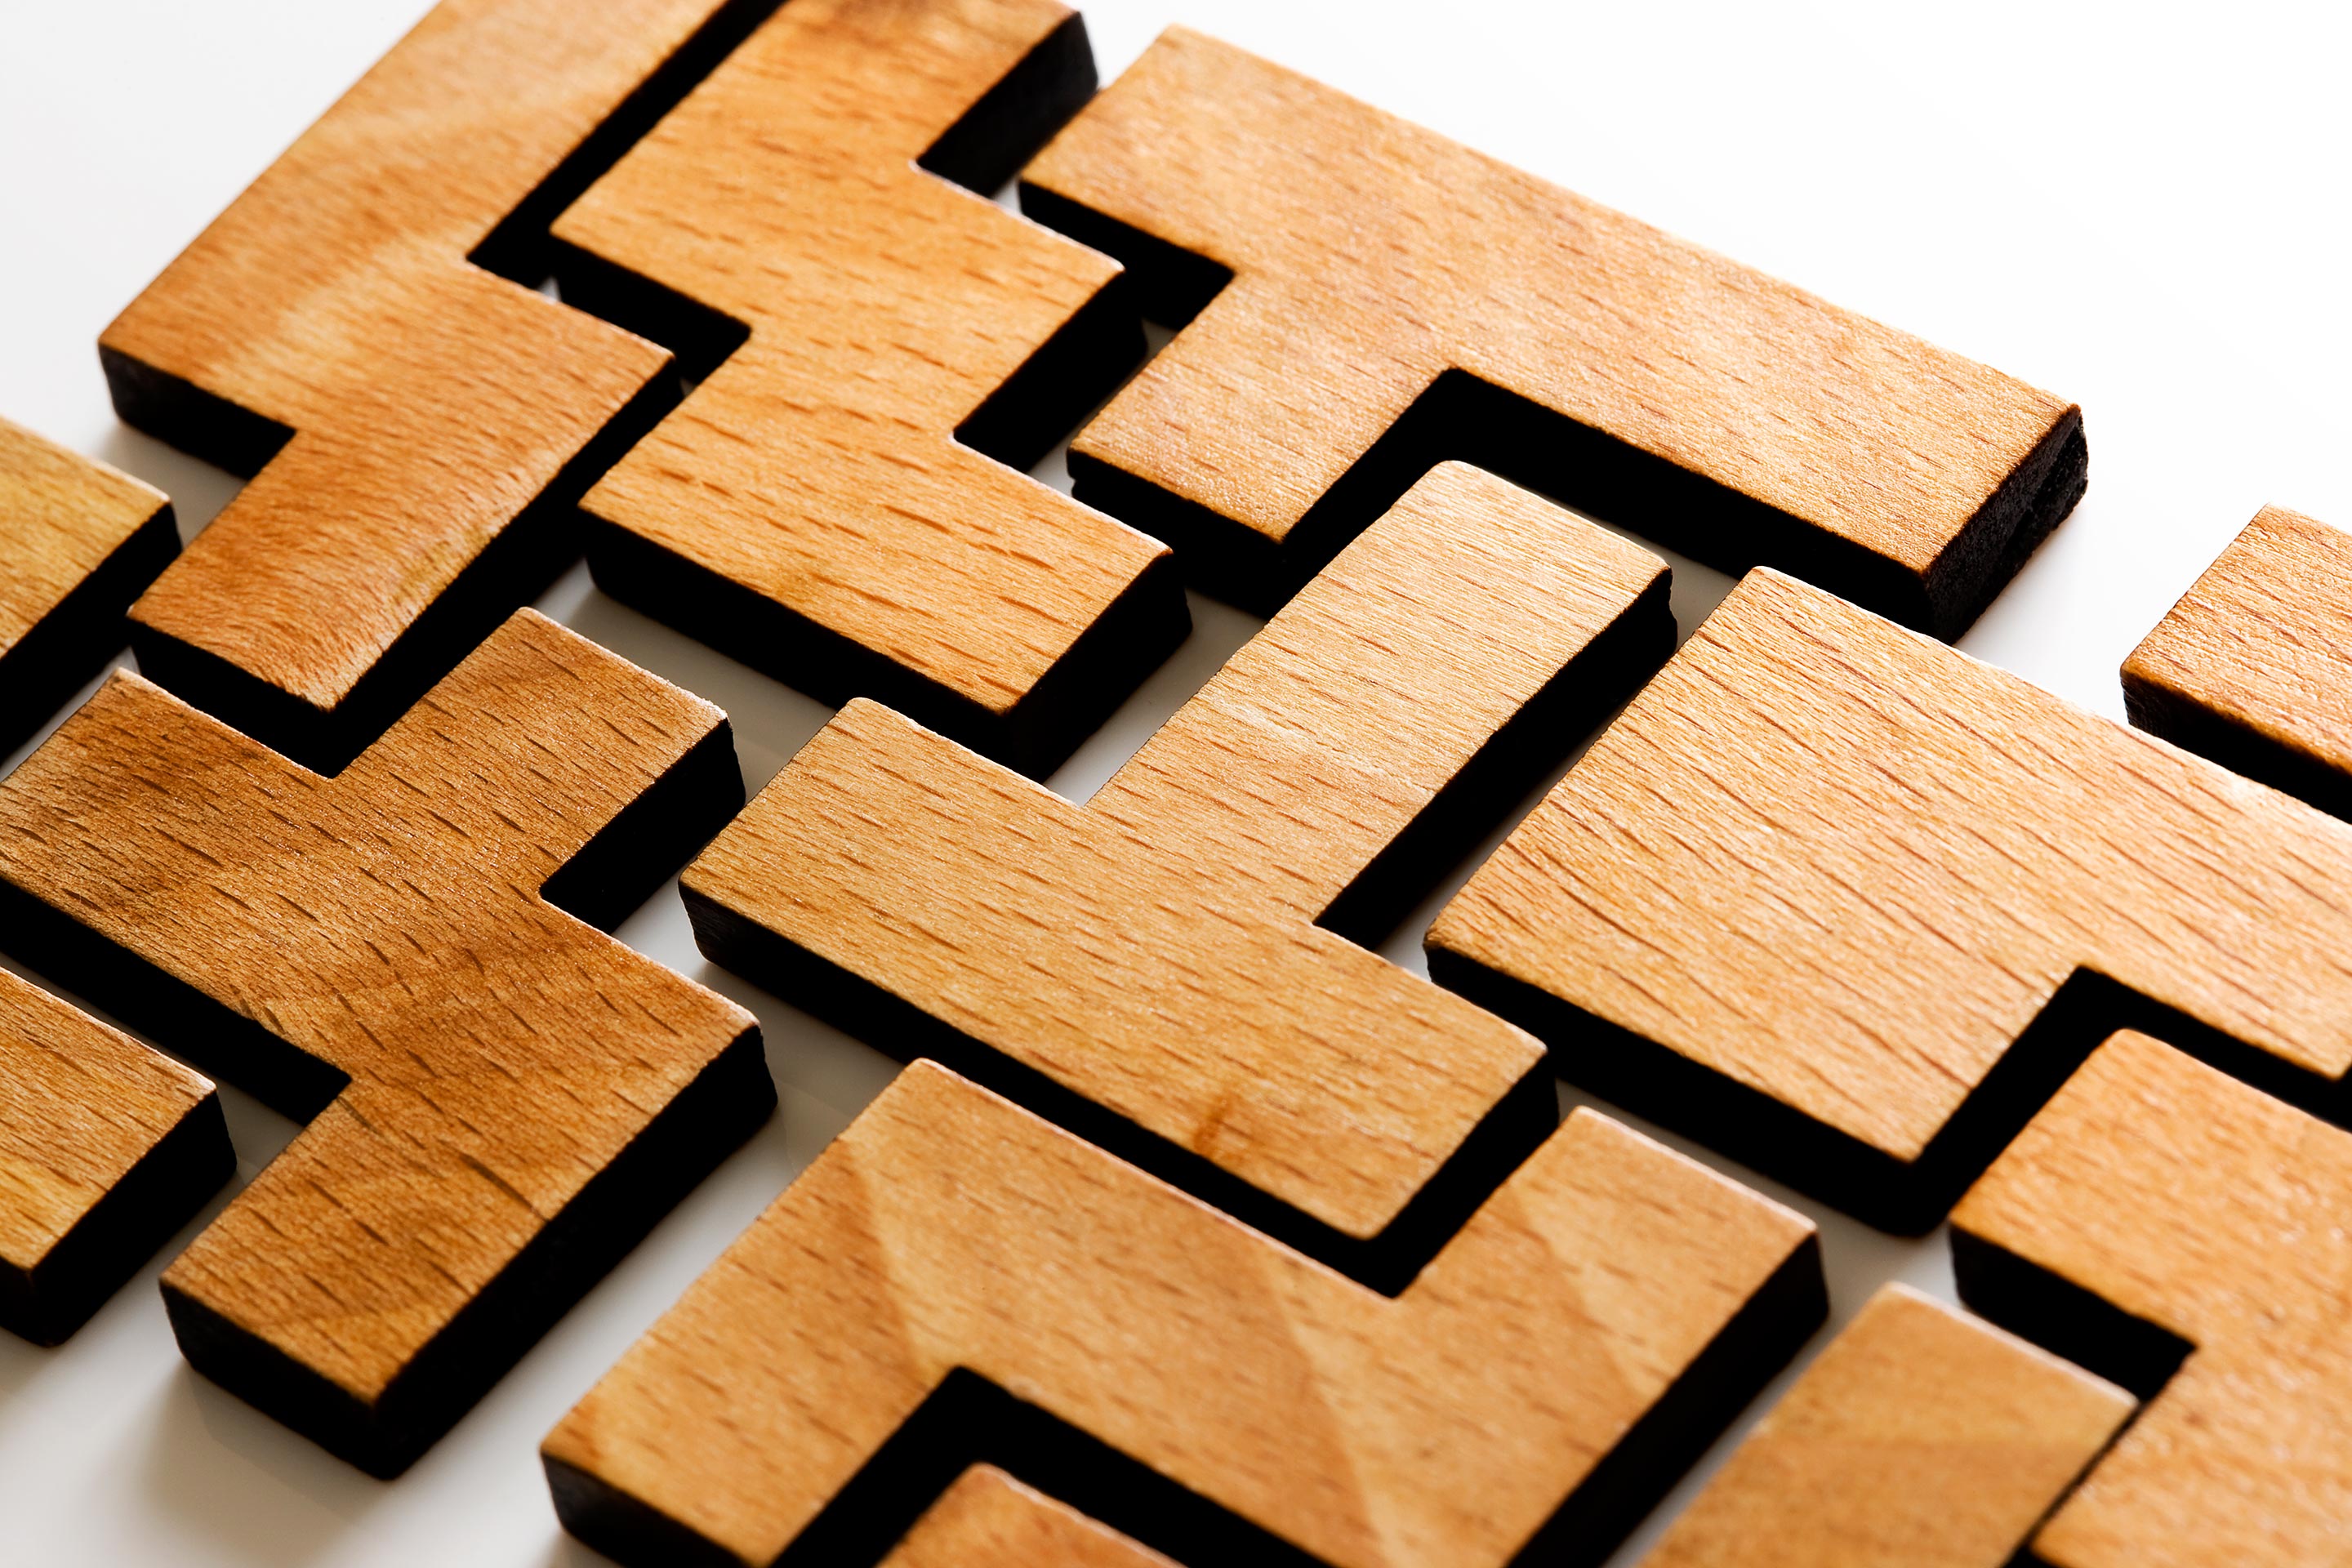 Wooden blocks are all different shapes yet come together to connect and create a solid piece.